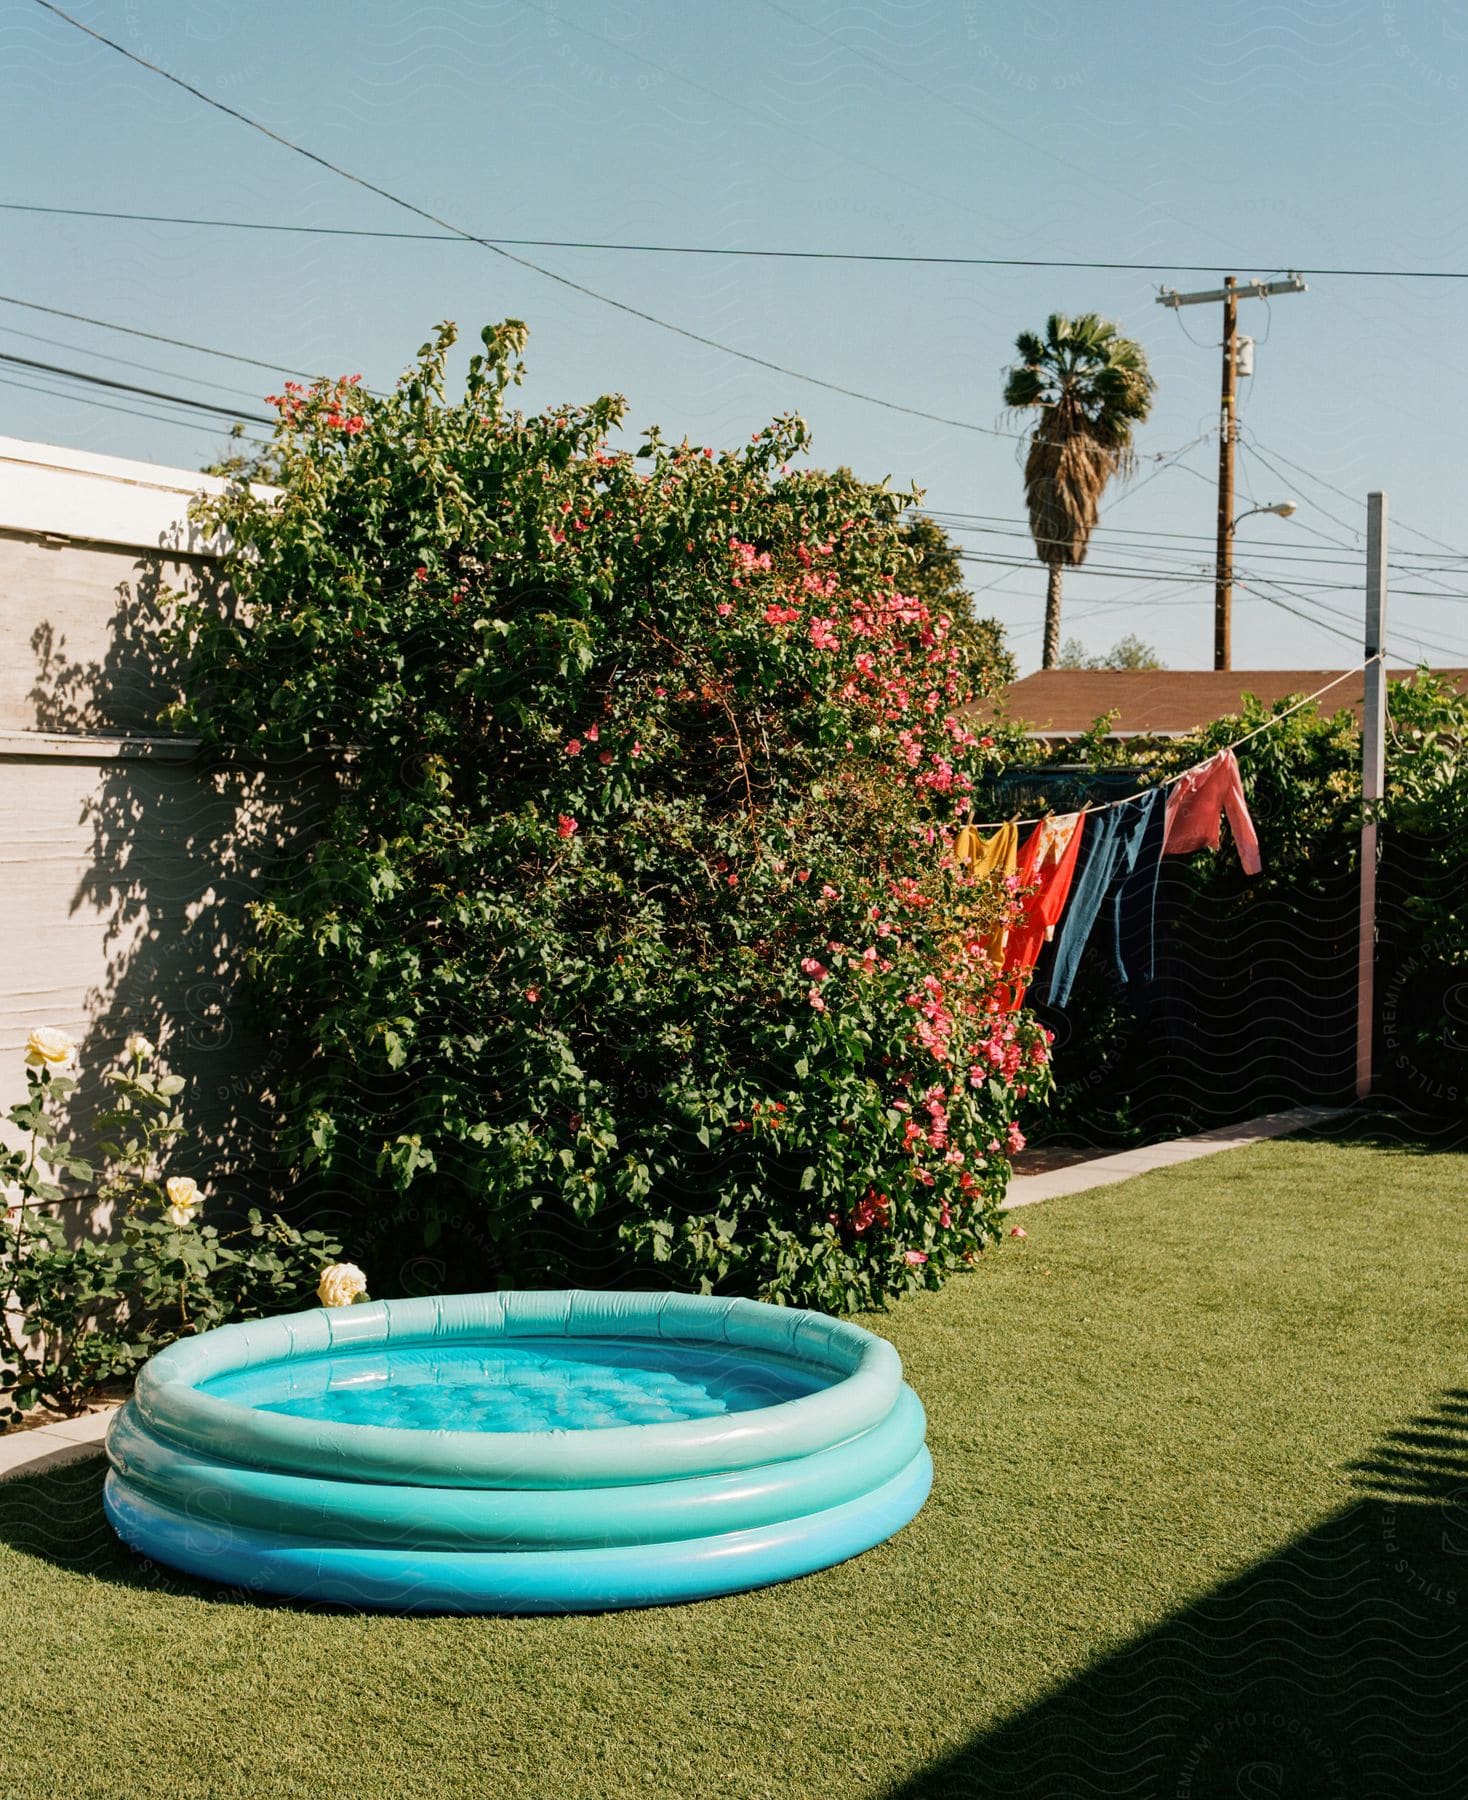 a kiddie pool is placed in a backyard near clothes drying on a line